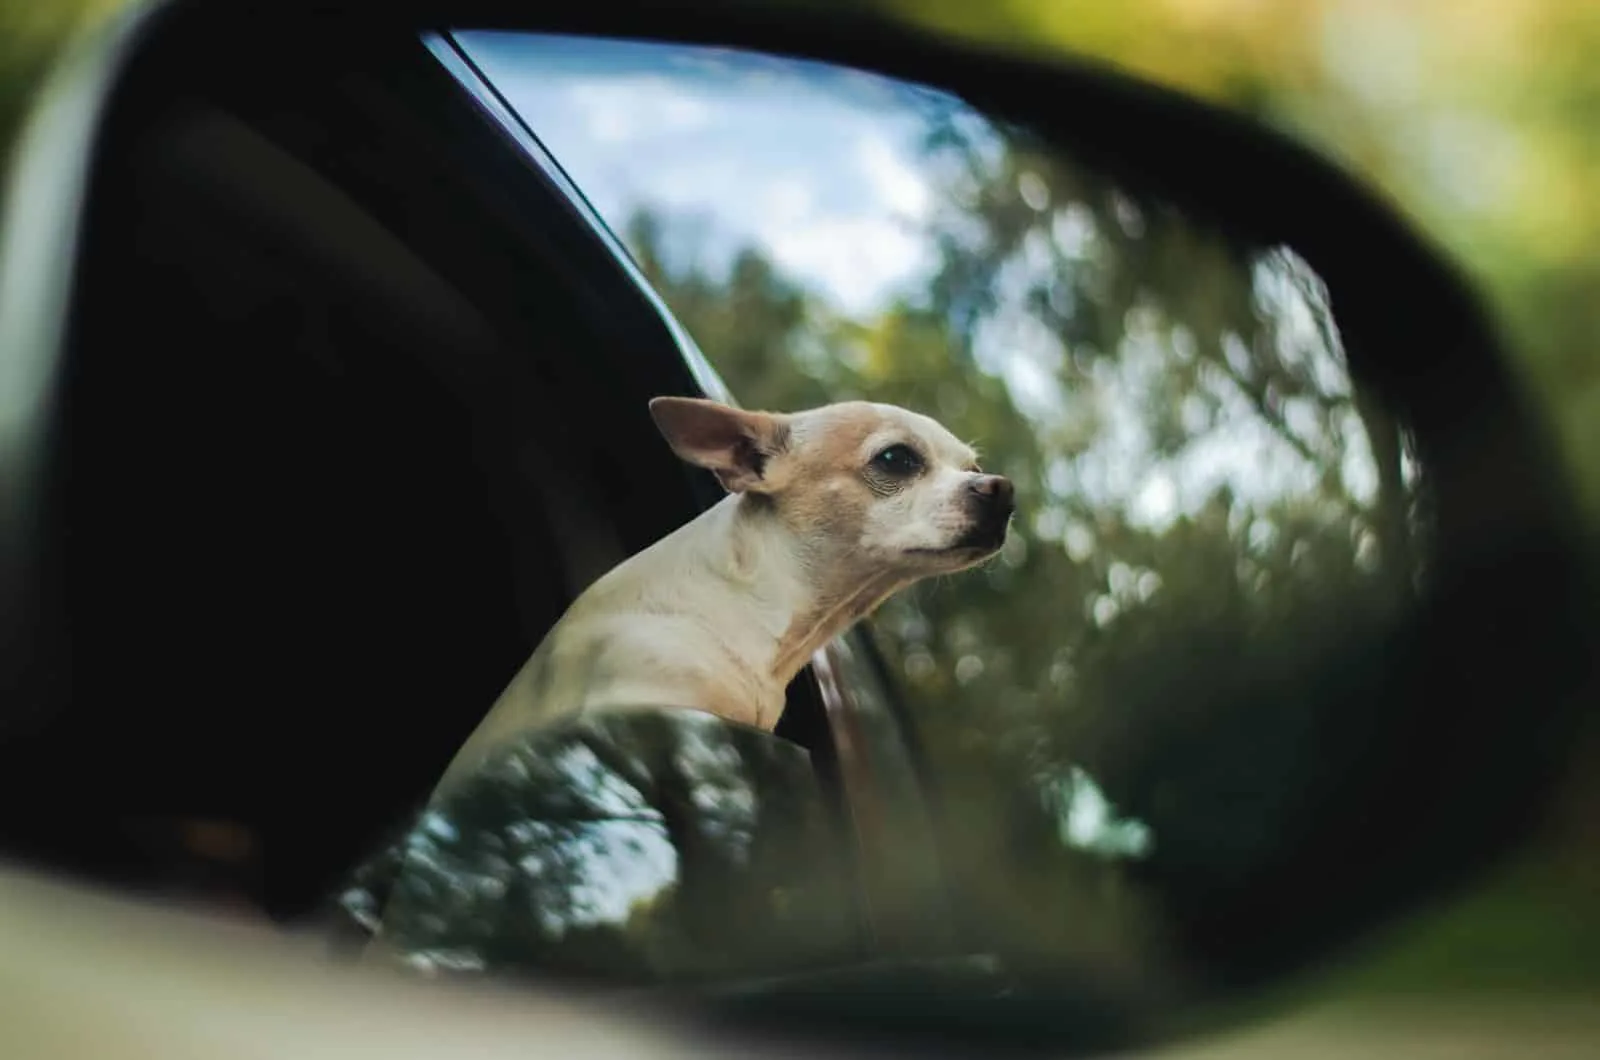 Whippet Chihuahua Mix in car